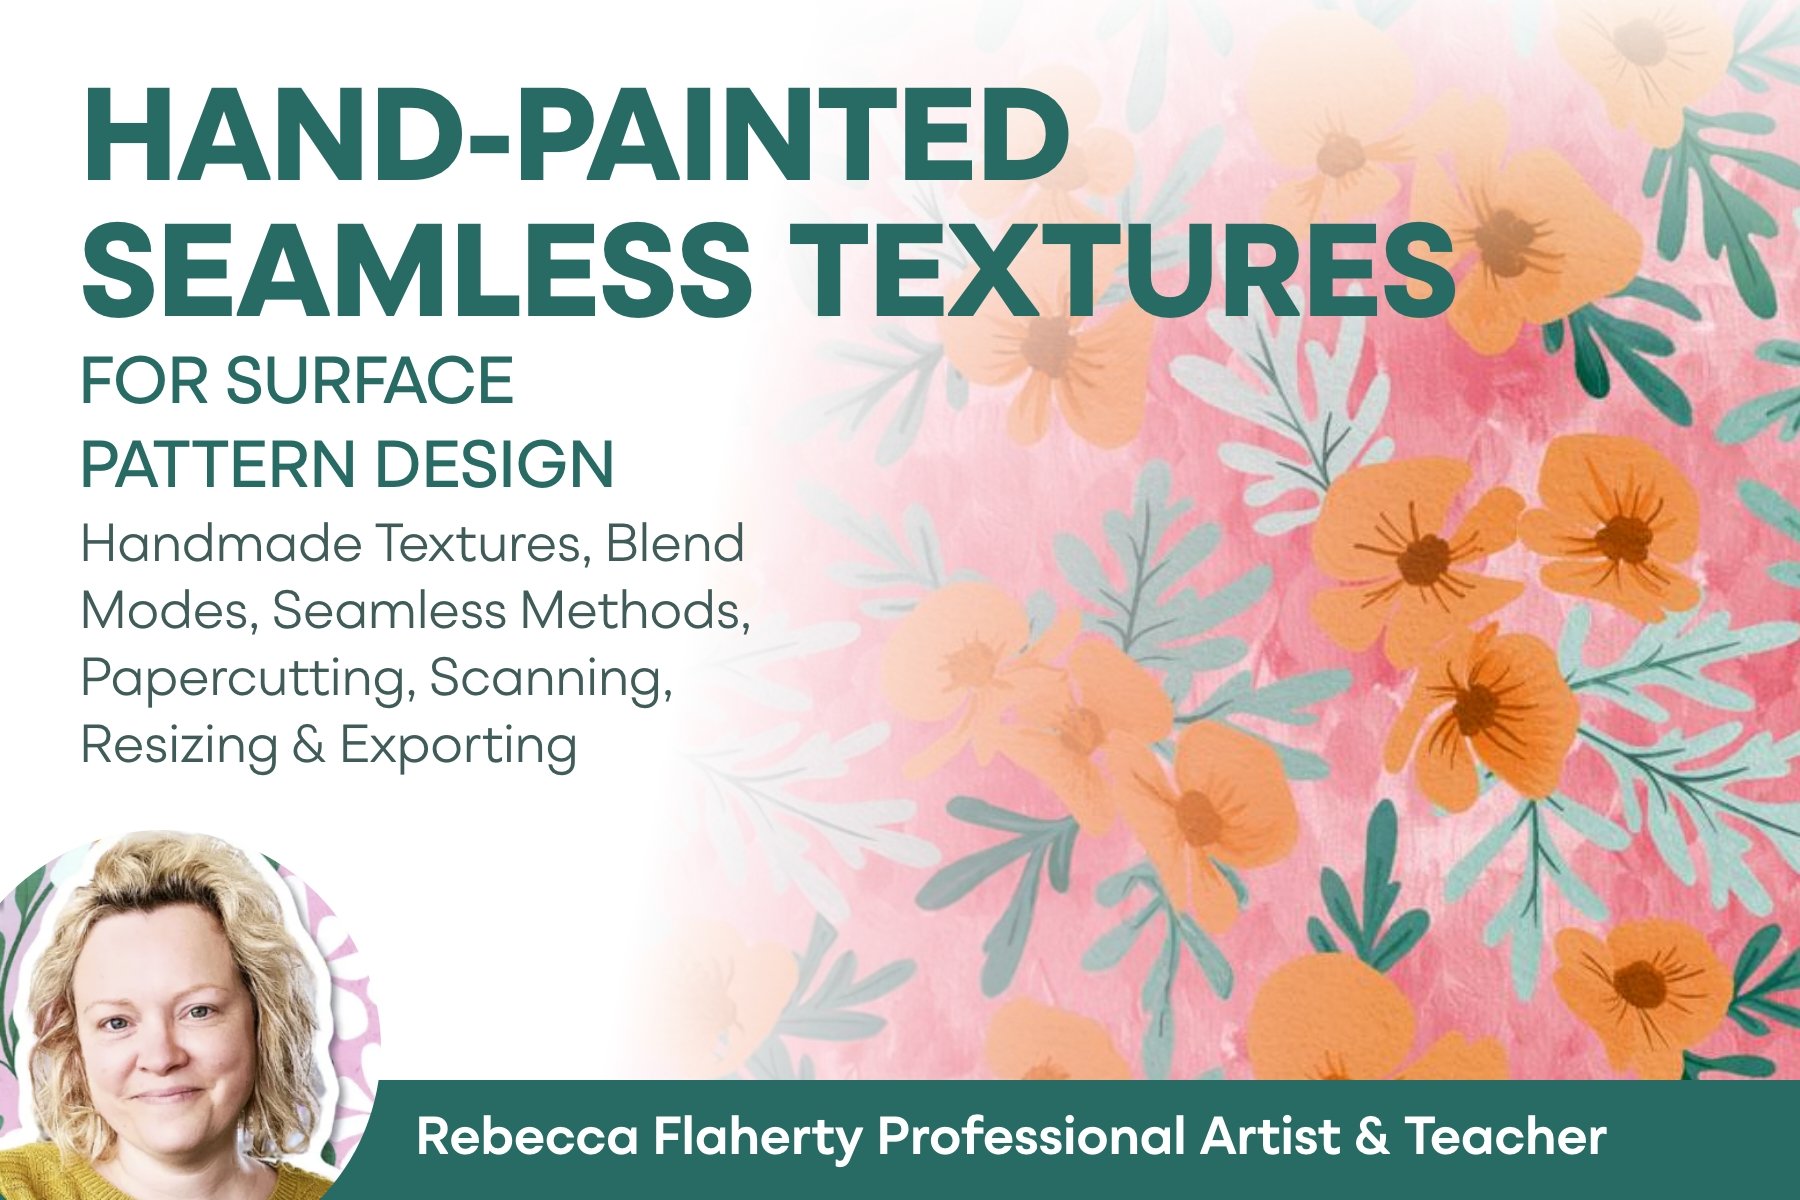 Hand-Painted Seamless Textures For Surface Pattern Design